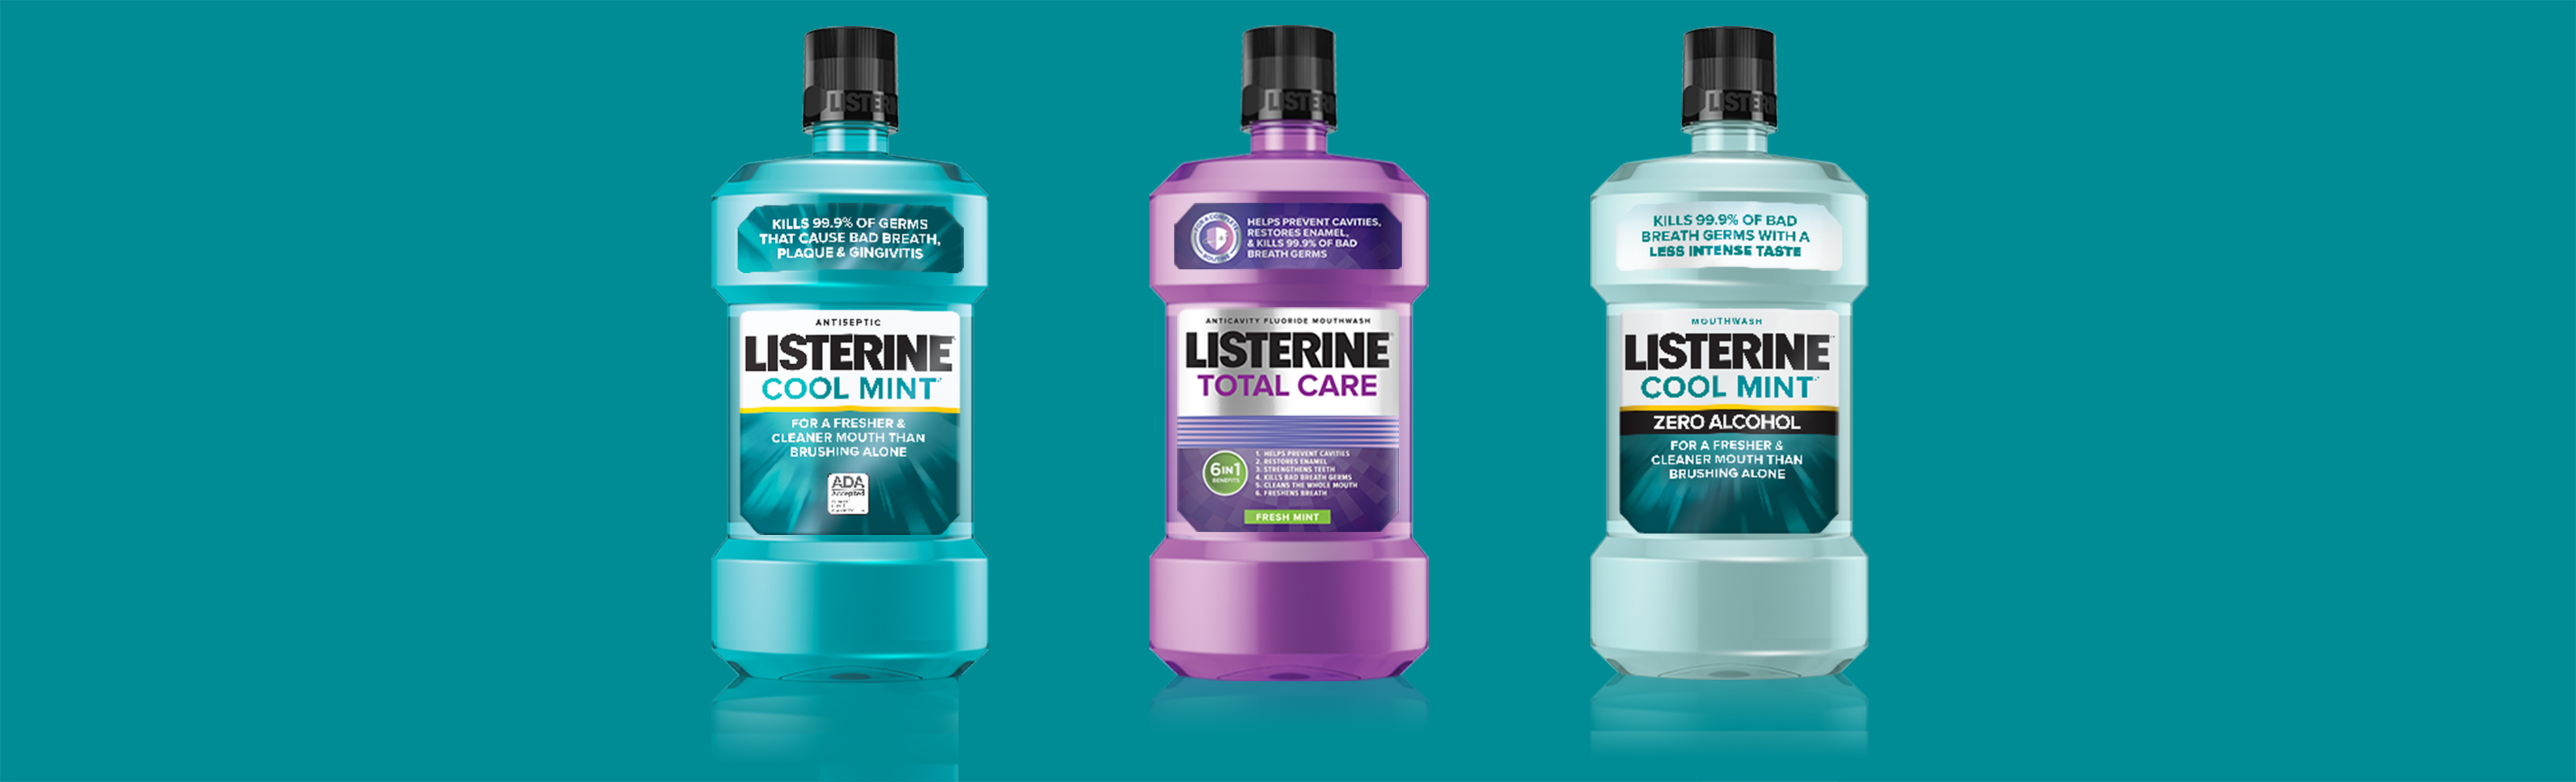 2-Pack Listerine Cool Mint Antiseptic Mouthwash Kills 99% of Germs